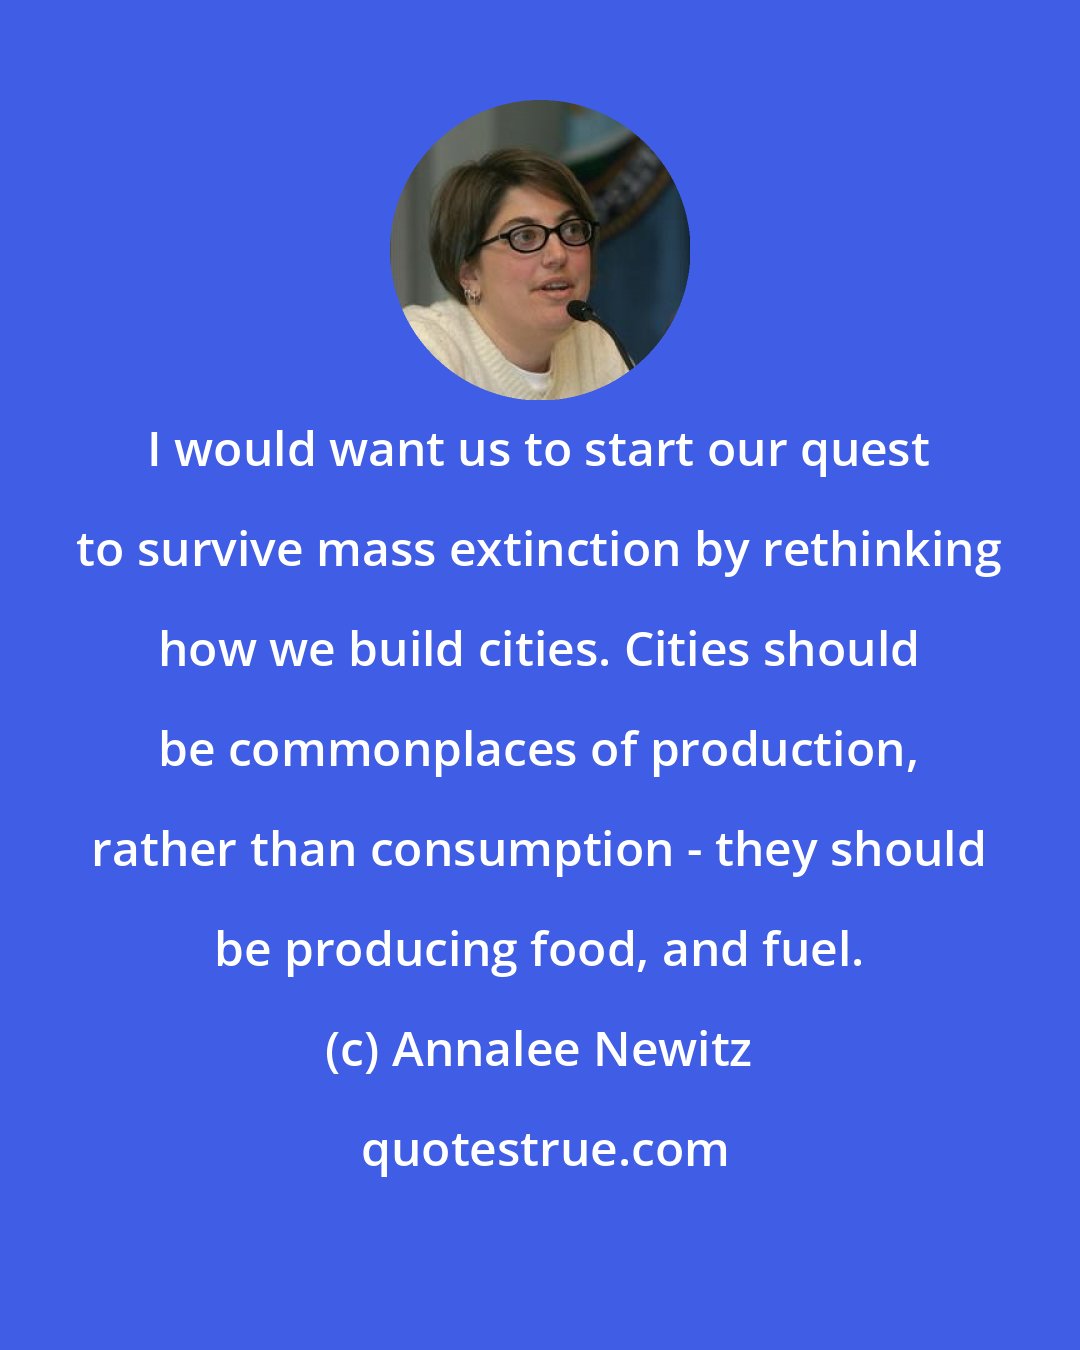 Annalee Newitz: I would want us to start our quest to survive mass extinction by rethinking how we build cities. Cities should be commonplaces of production, rather than consumption - they should be producing food, and fuel.